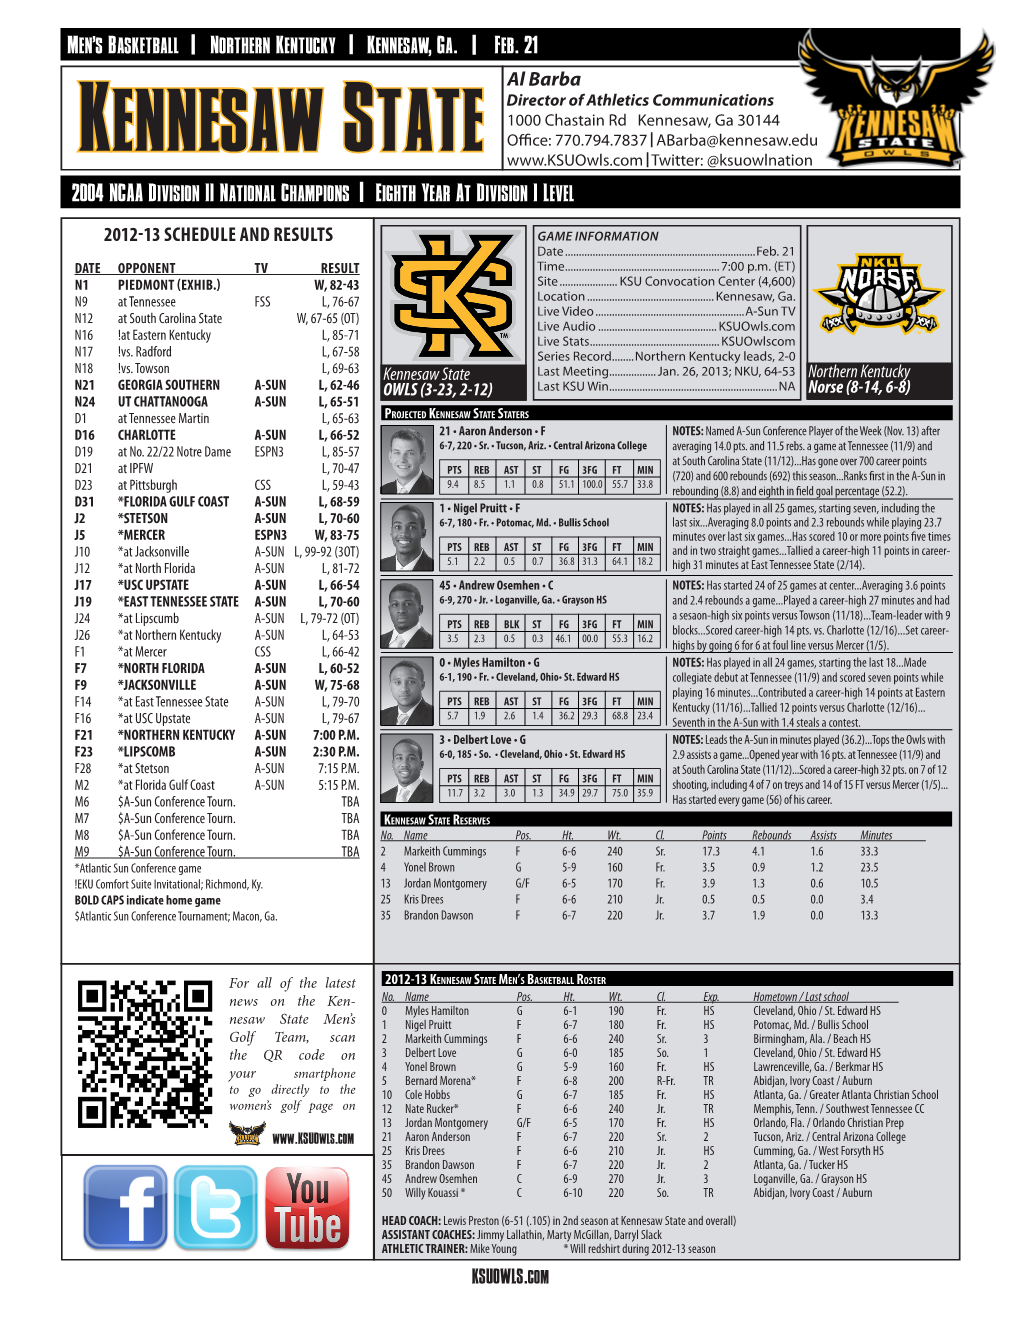 Kennesaw State Twitter: @Ksuowlnation 2004 NCAA Division II National Champions Eighth Year at Division I Level